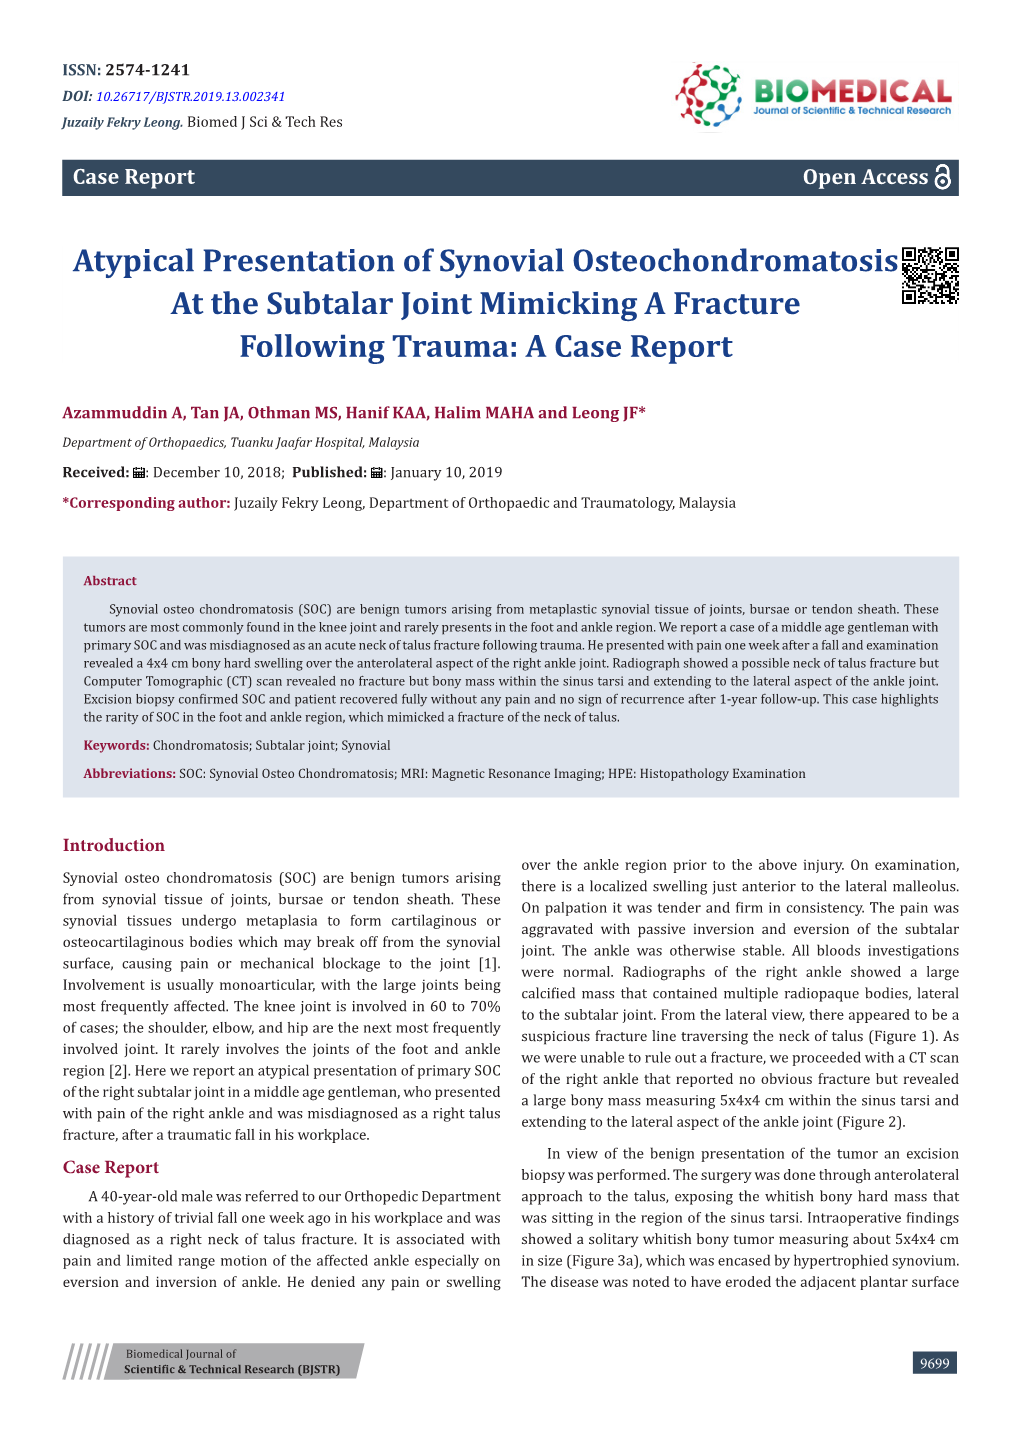 Atypical Presentation of Synovial Osteochondromatosis at the Subtalar Joint Mimicking a Fracture Following Trauma: a Case Report